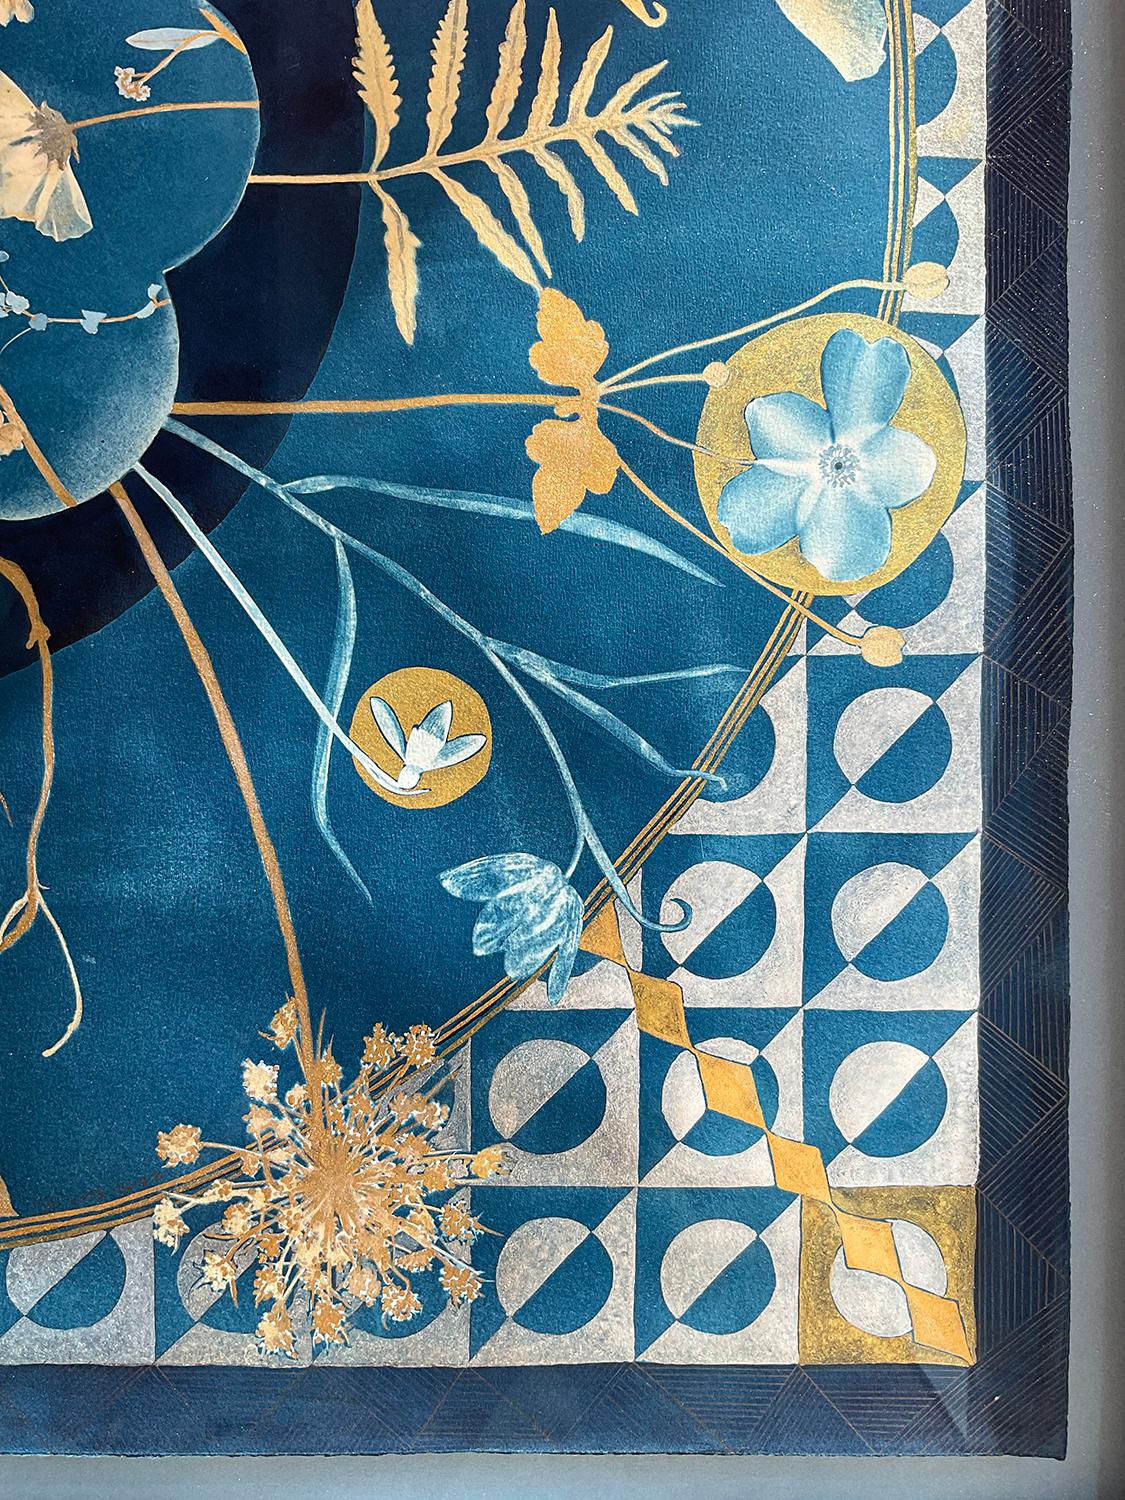 Figurative Still Life painting of blue and gold flowers on an indigo cyanotype and geometric patterned background 
